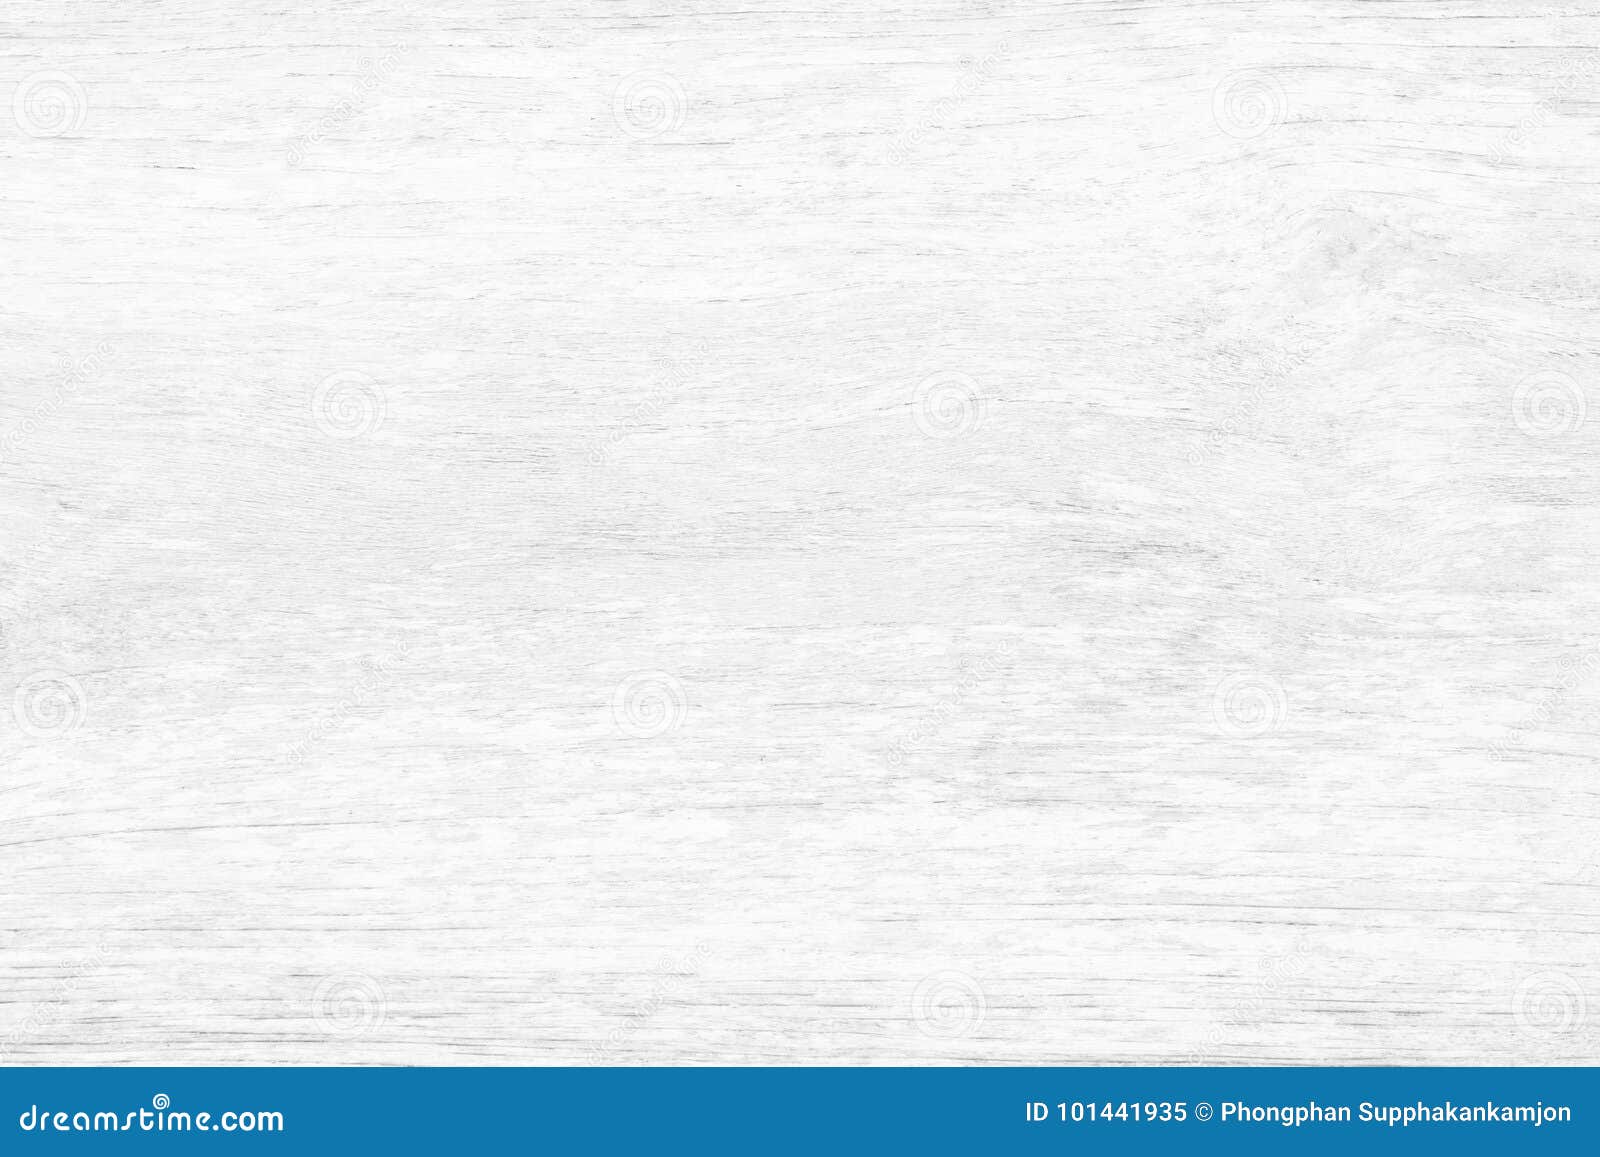 abstract rustic surface white wood table texture background. close up of rustic wall made of white wood table planks texture.